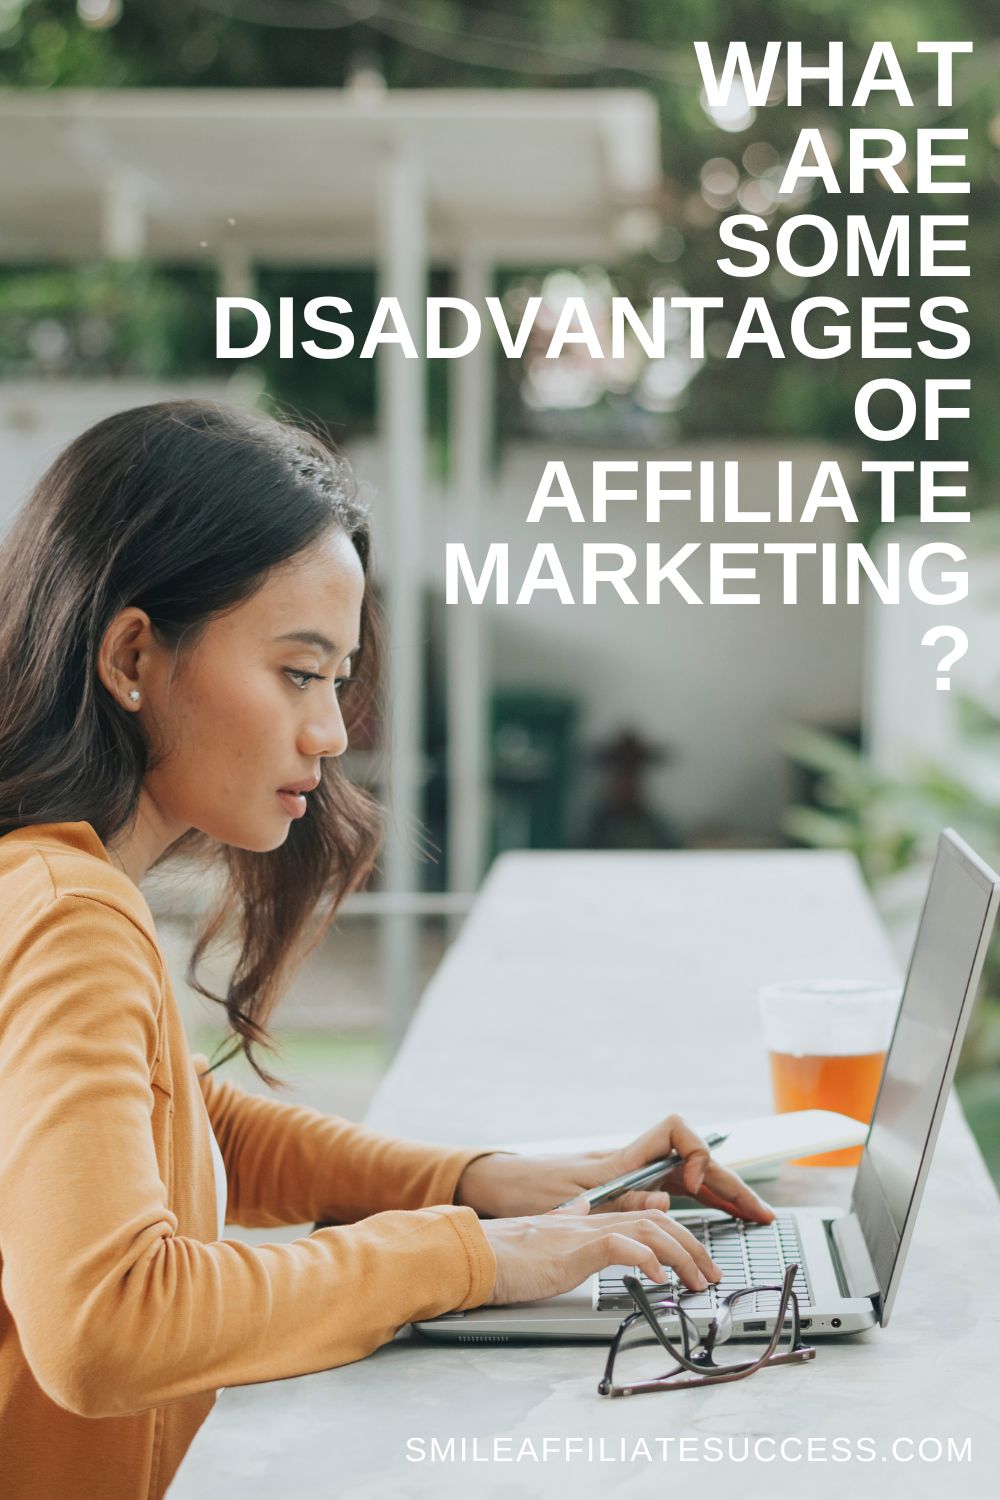 What Are Some Disadvantages Of Affiliate Marketing?